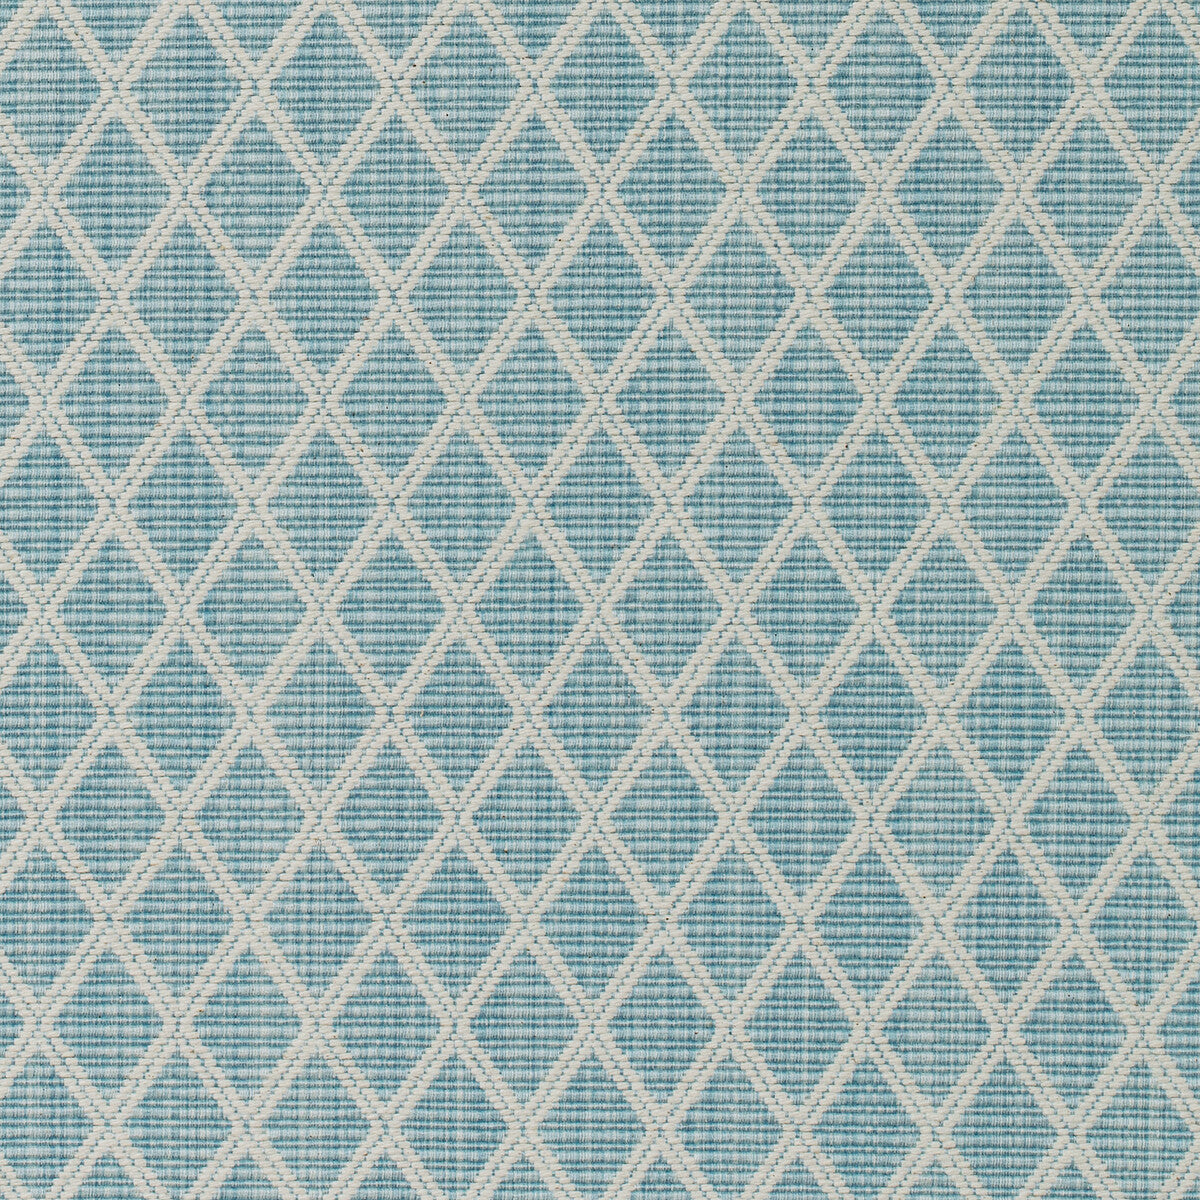 Cancale Woven fabric in sky color - pattern 8020109.15.0 - by Brunschwig &amp; Fils in the Granville Weaves collection